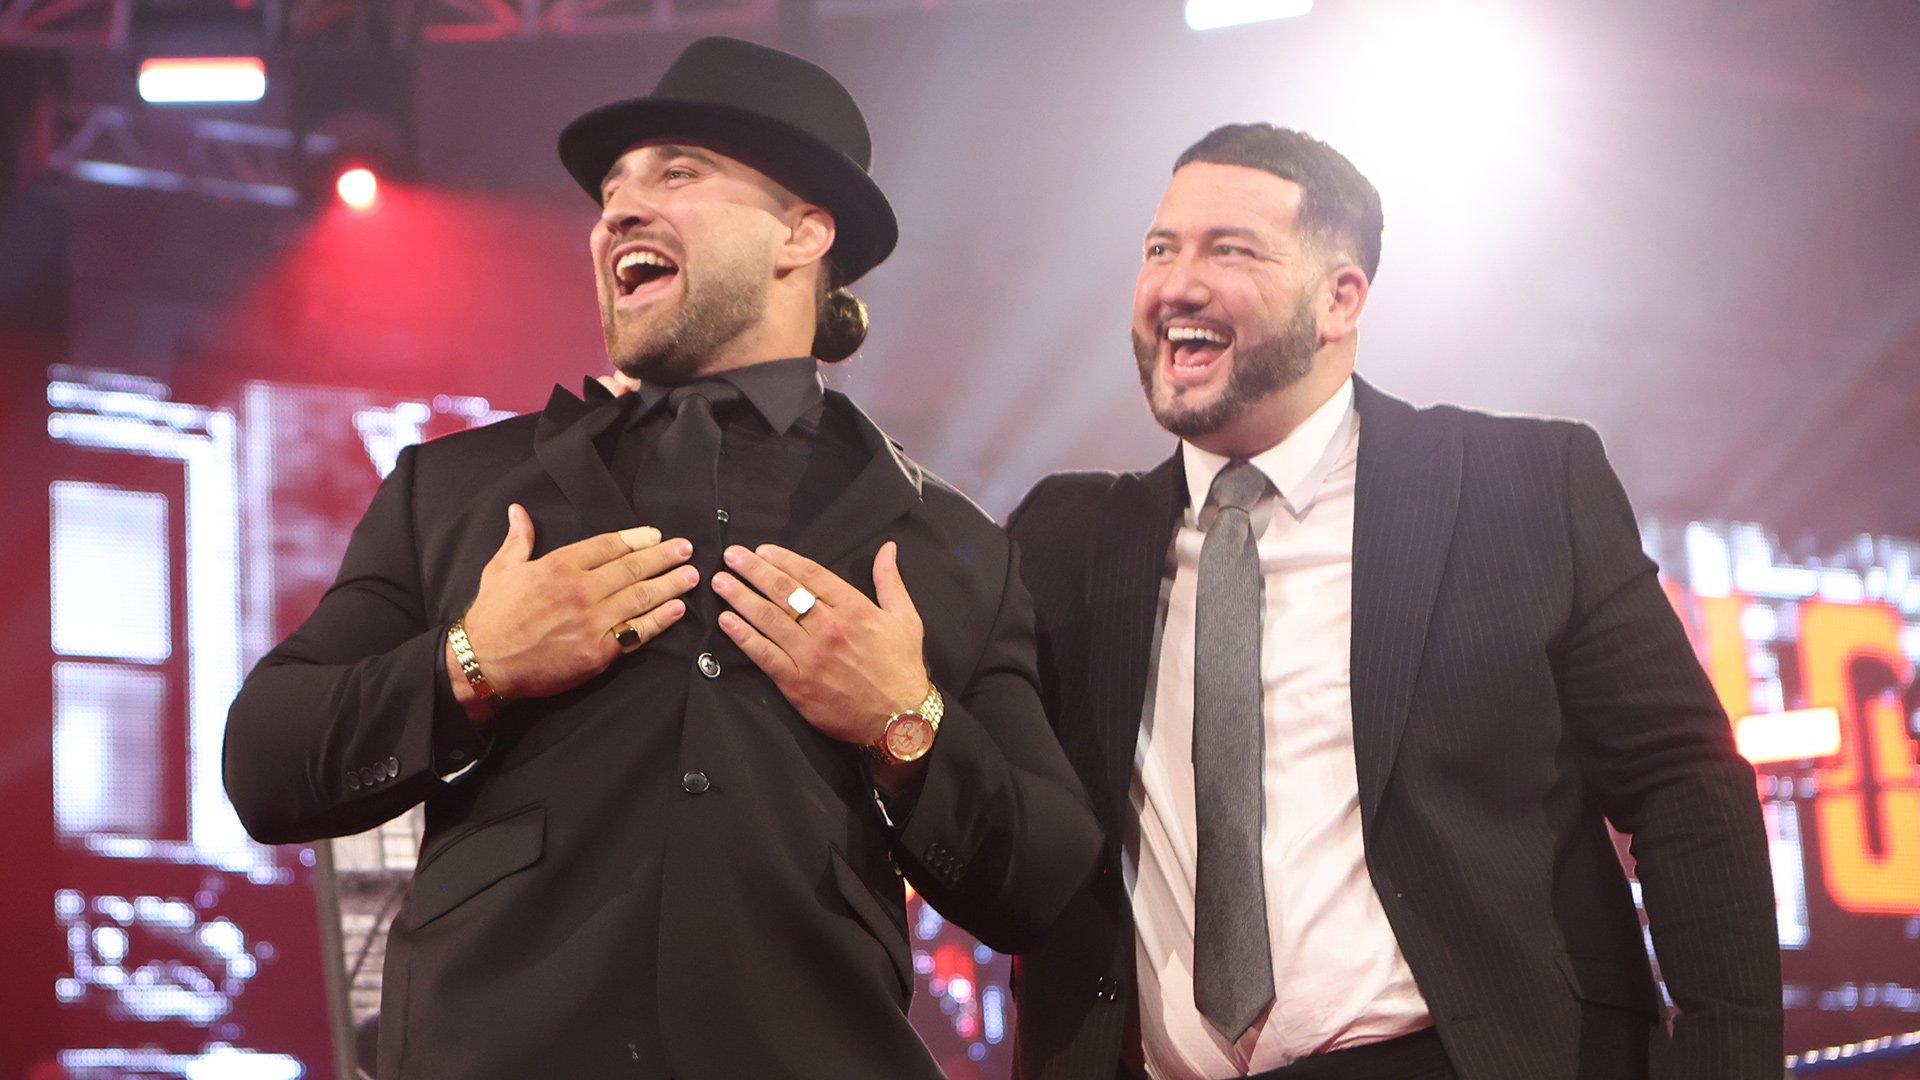 Tony D'Angelo enters with former Danbury Trashers GM AJ Galante at NXT  Stand & Deliver | WWE